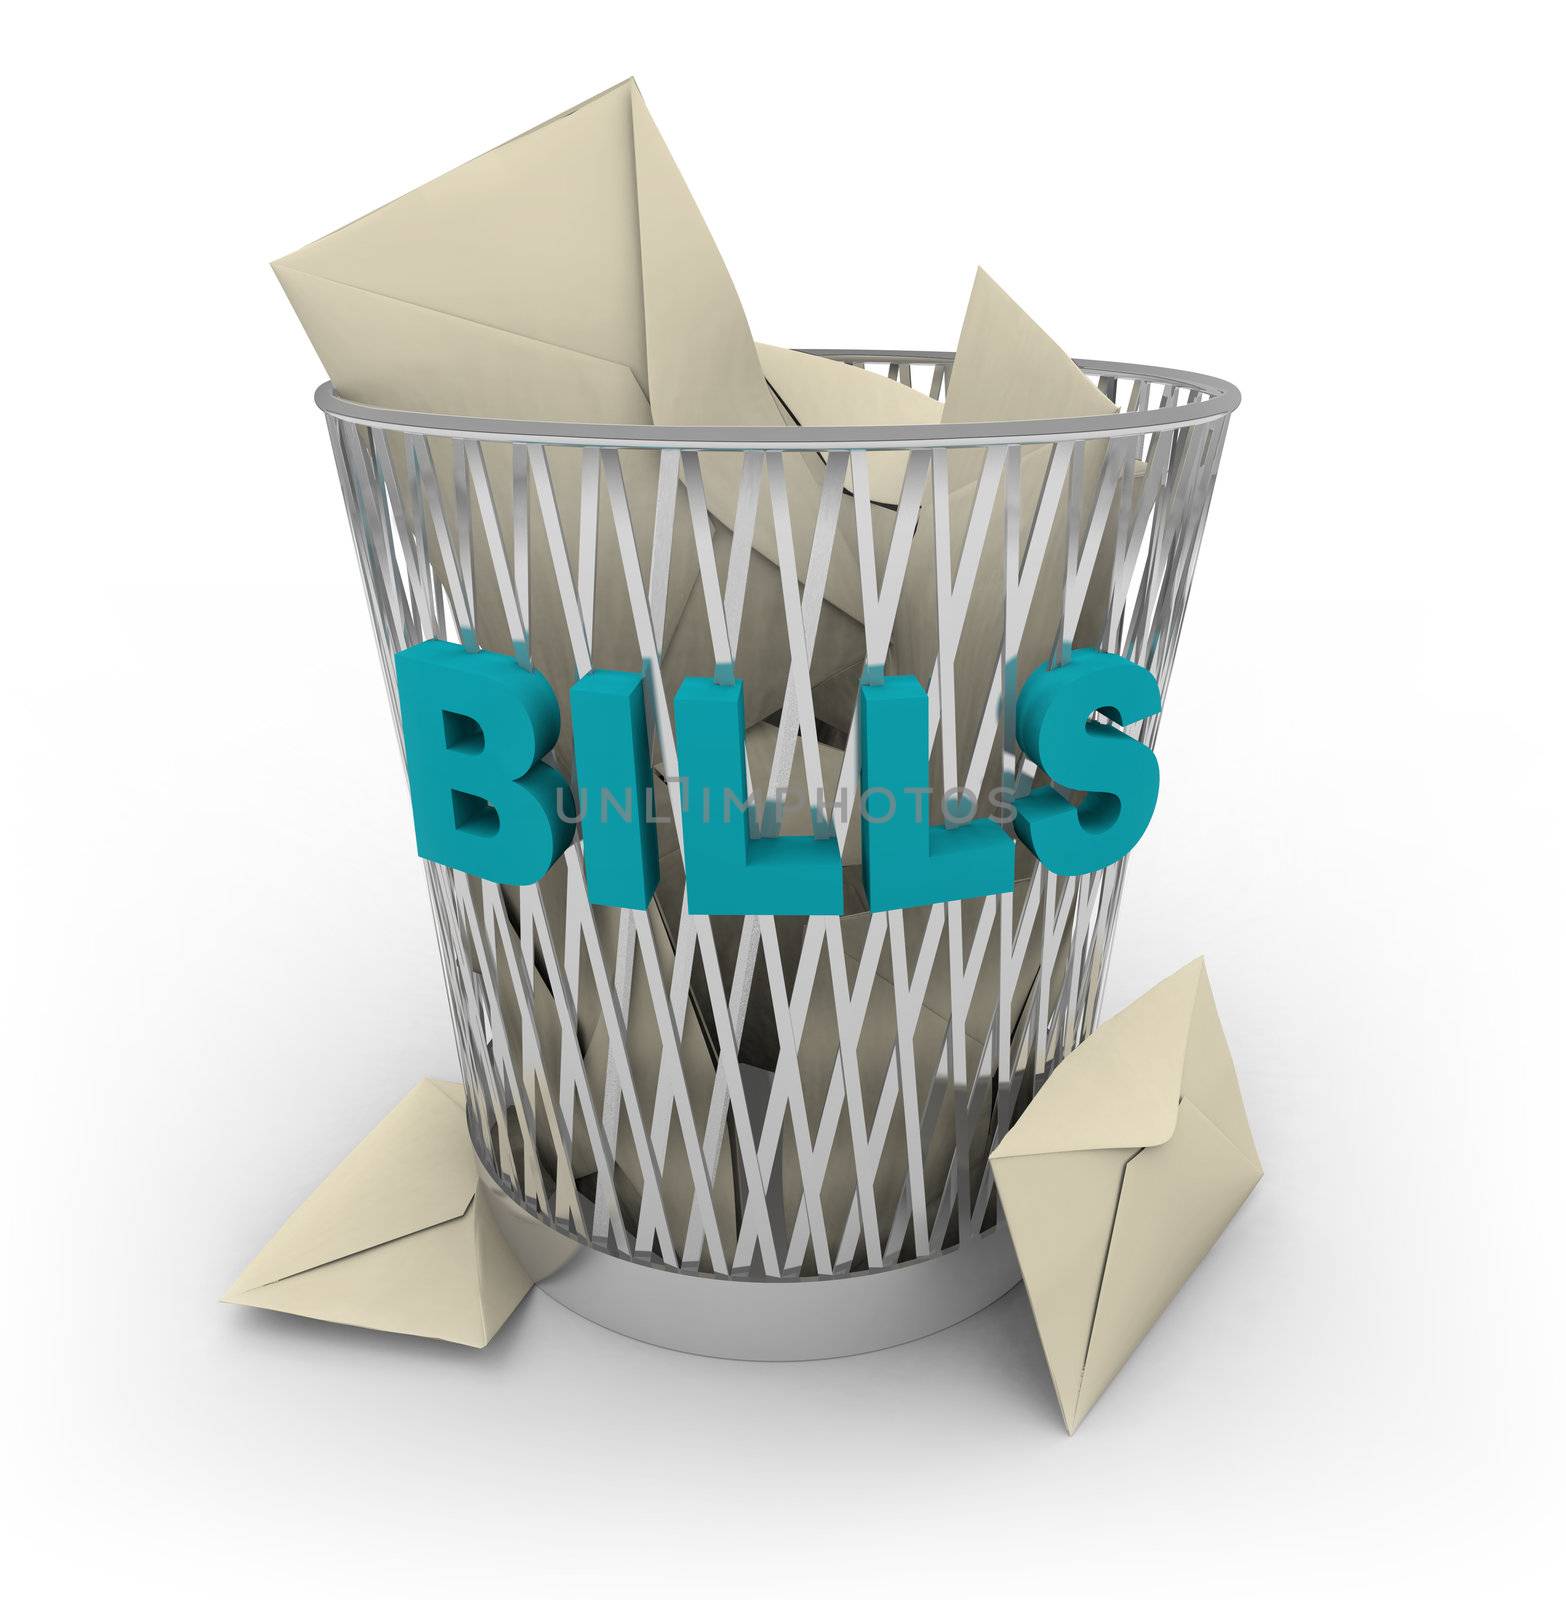 Rid yourself of your bills -- throw them away in this shiny metal garbage basket